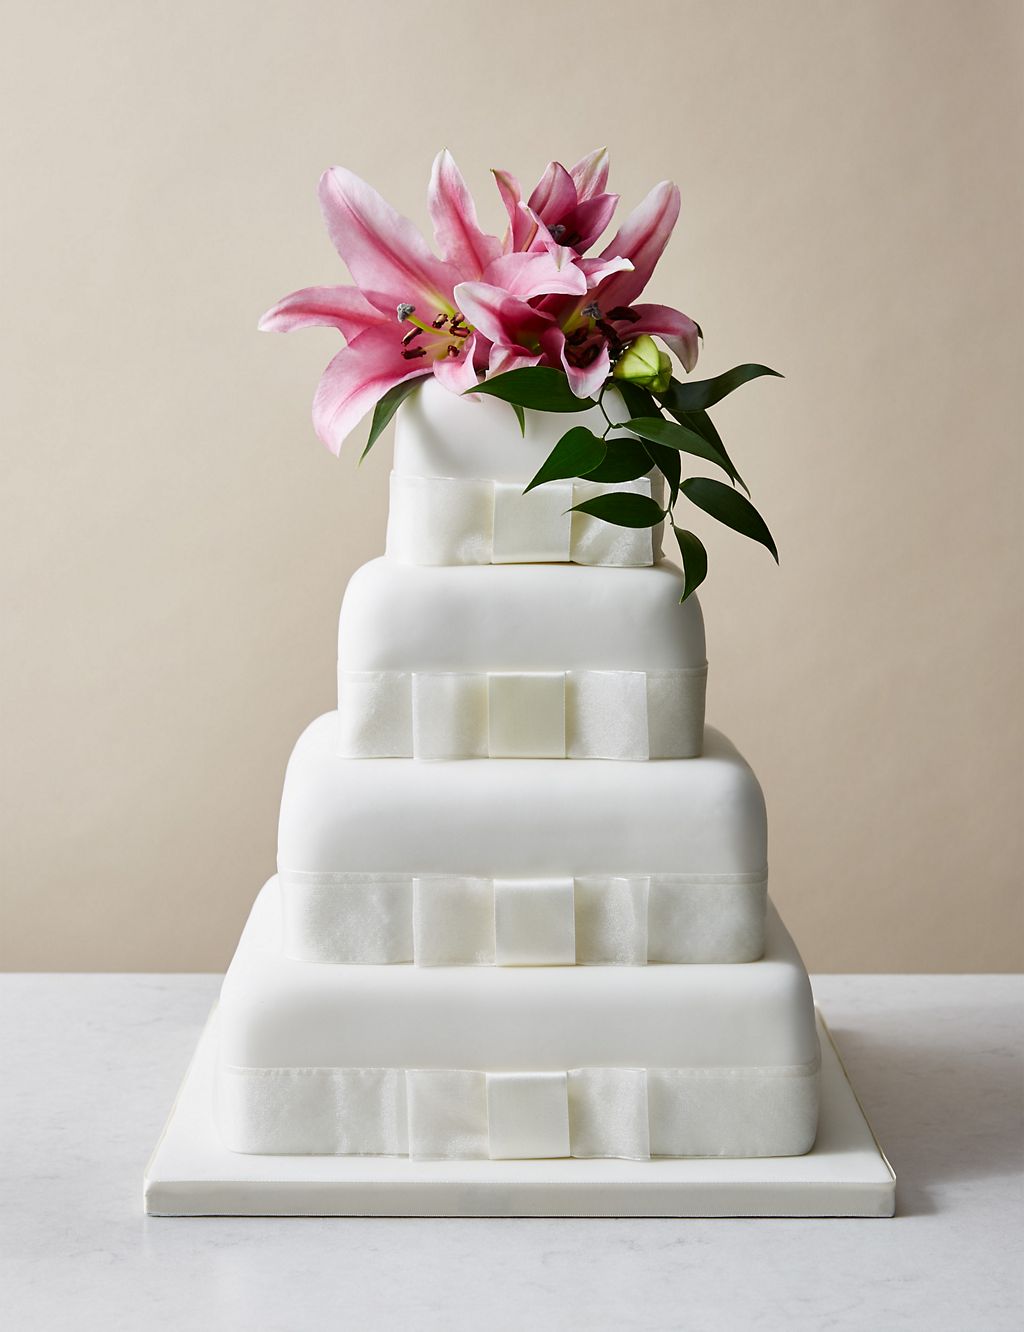 4 Tier Elegant Wedding Cake – Assorted Flavours with Lemon (Serves 200) Last order date 26th March 3 of 4